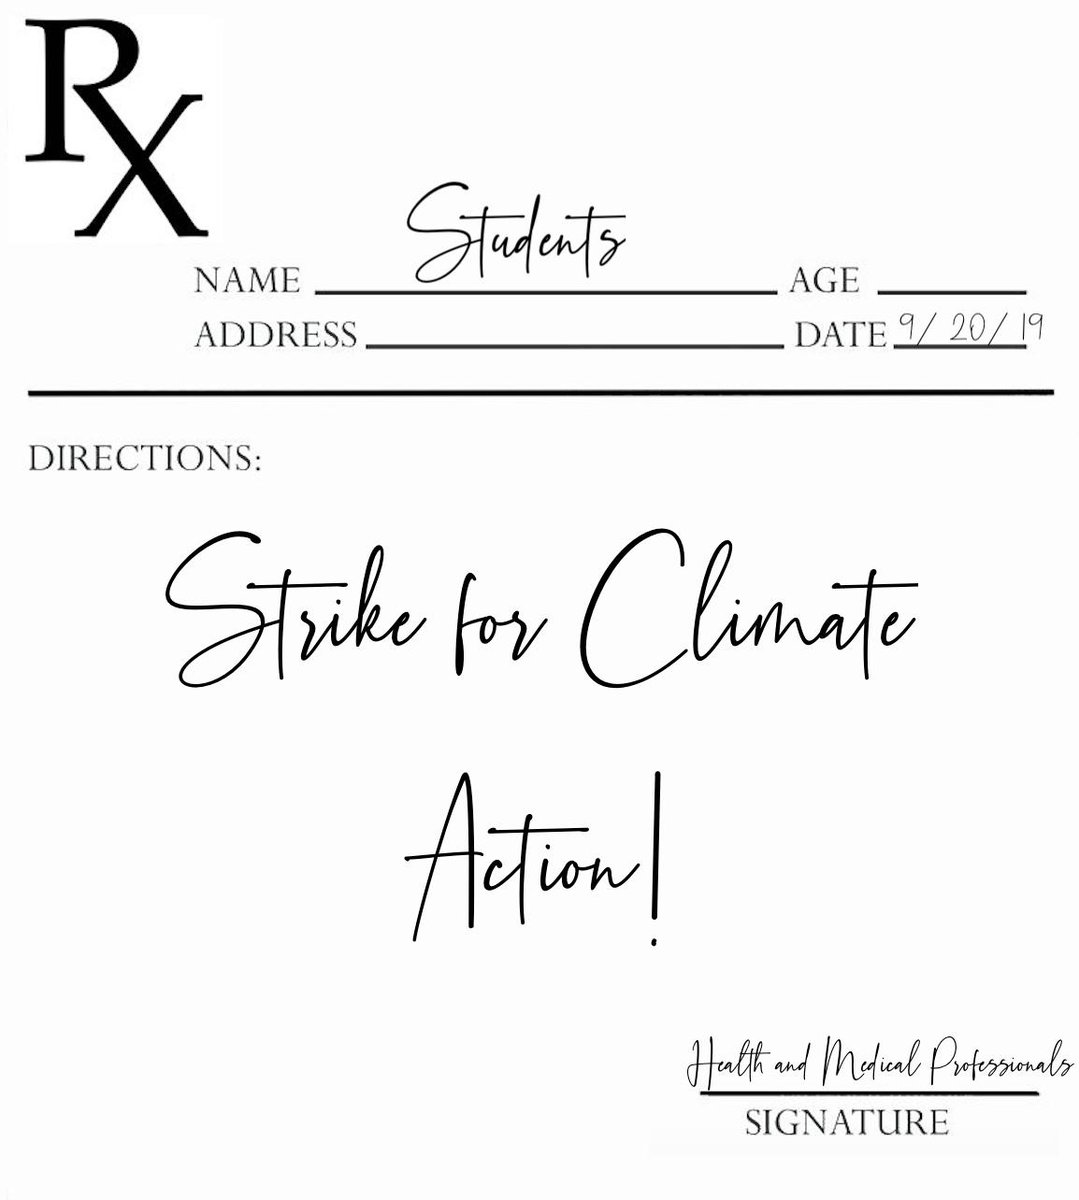 More than 400 health & medical professionals have signed a medical excuse note for students striking for climate action on September 20th because we are in a #ClimateHealthEmergency and need to act now.

⚫️ ⚫️⚫️

#StrikeWithUs and read more about the note: bit.ly/920STRIKENOTE